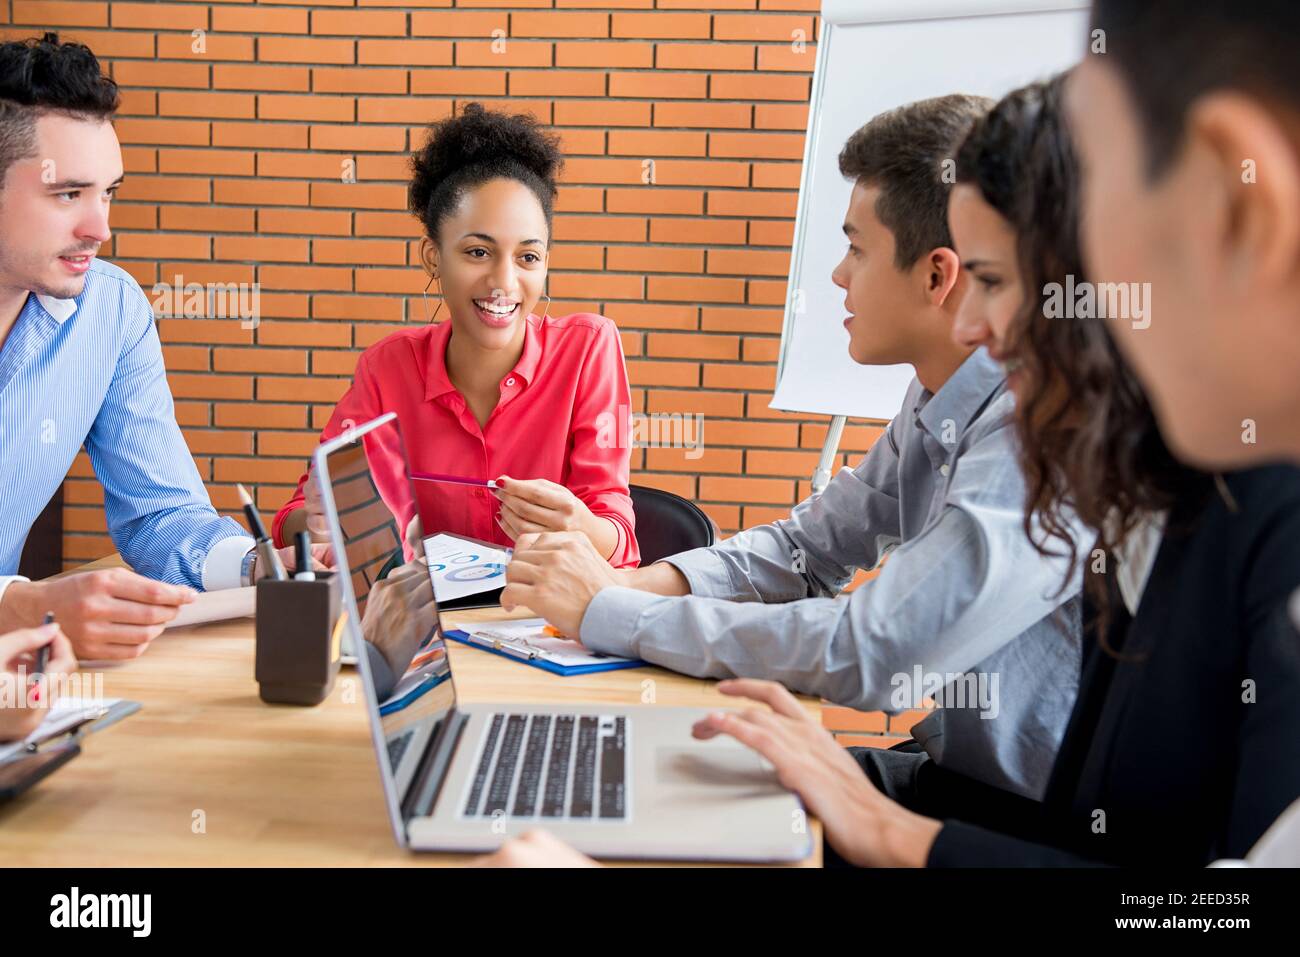 Smiling beautiful happy black business woman leader in sales meeting with her multiethinc colleague team Stock Photo